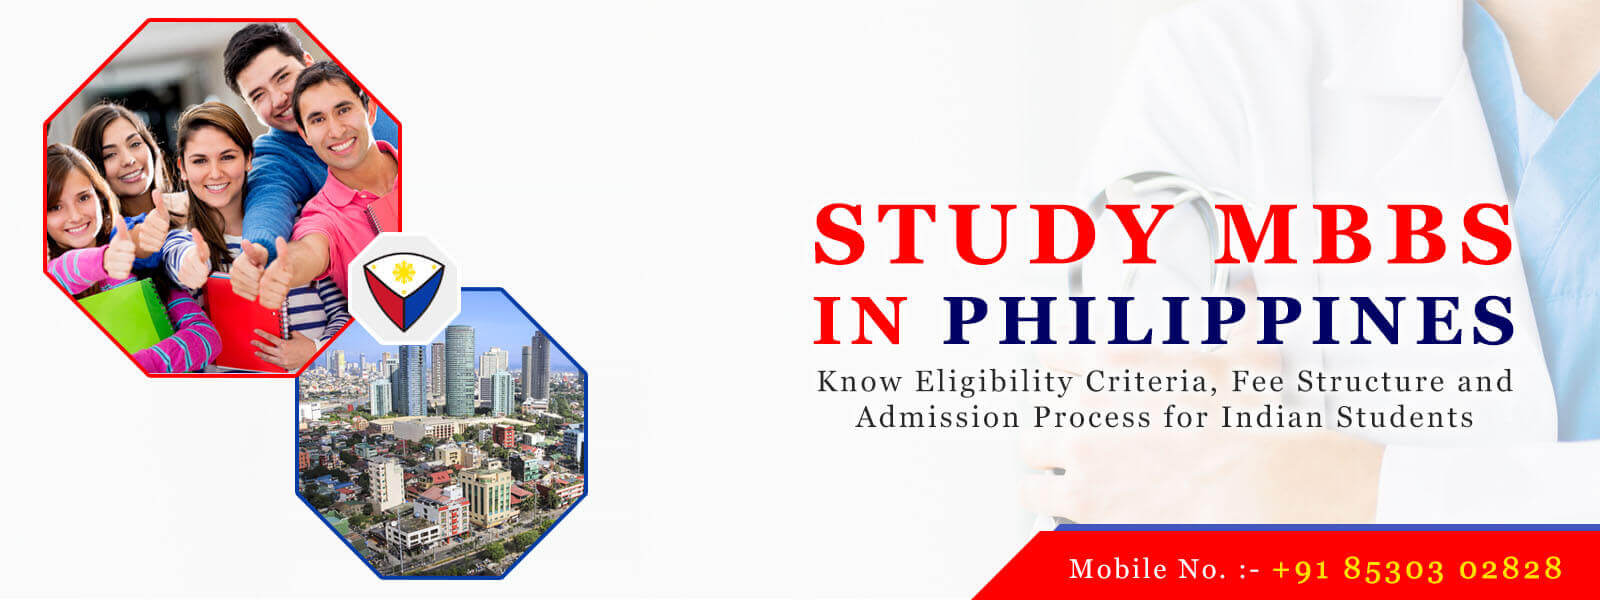 mbbs in philippines for indian students fees